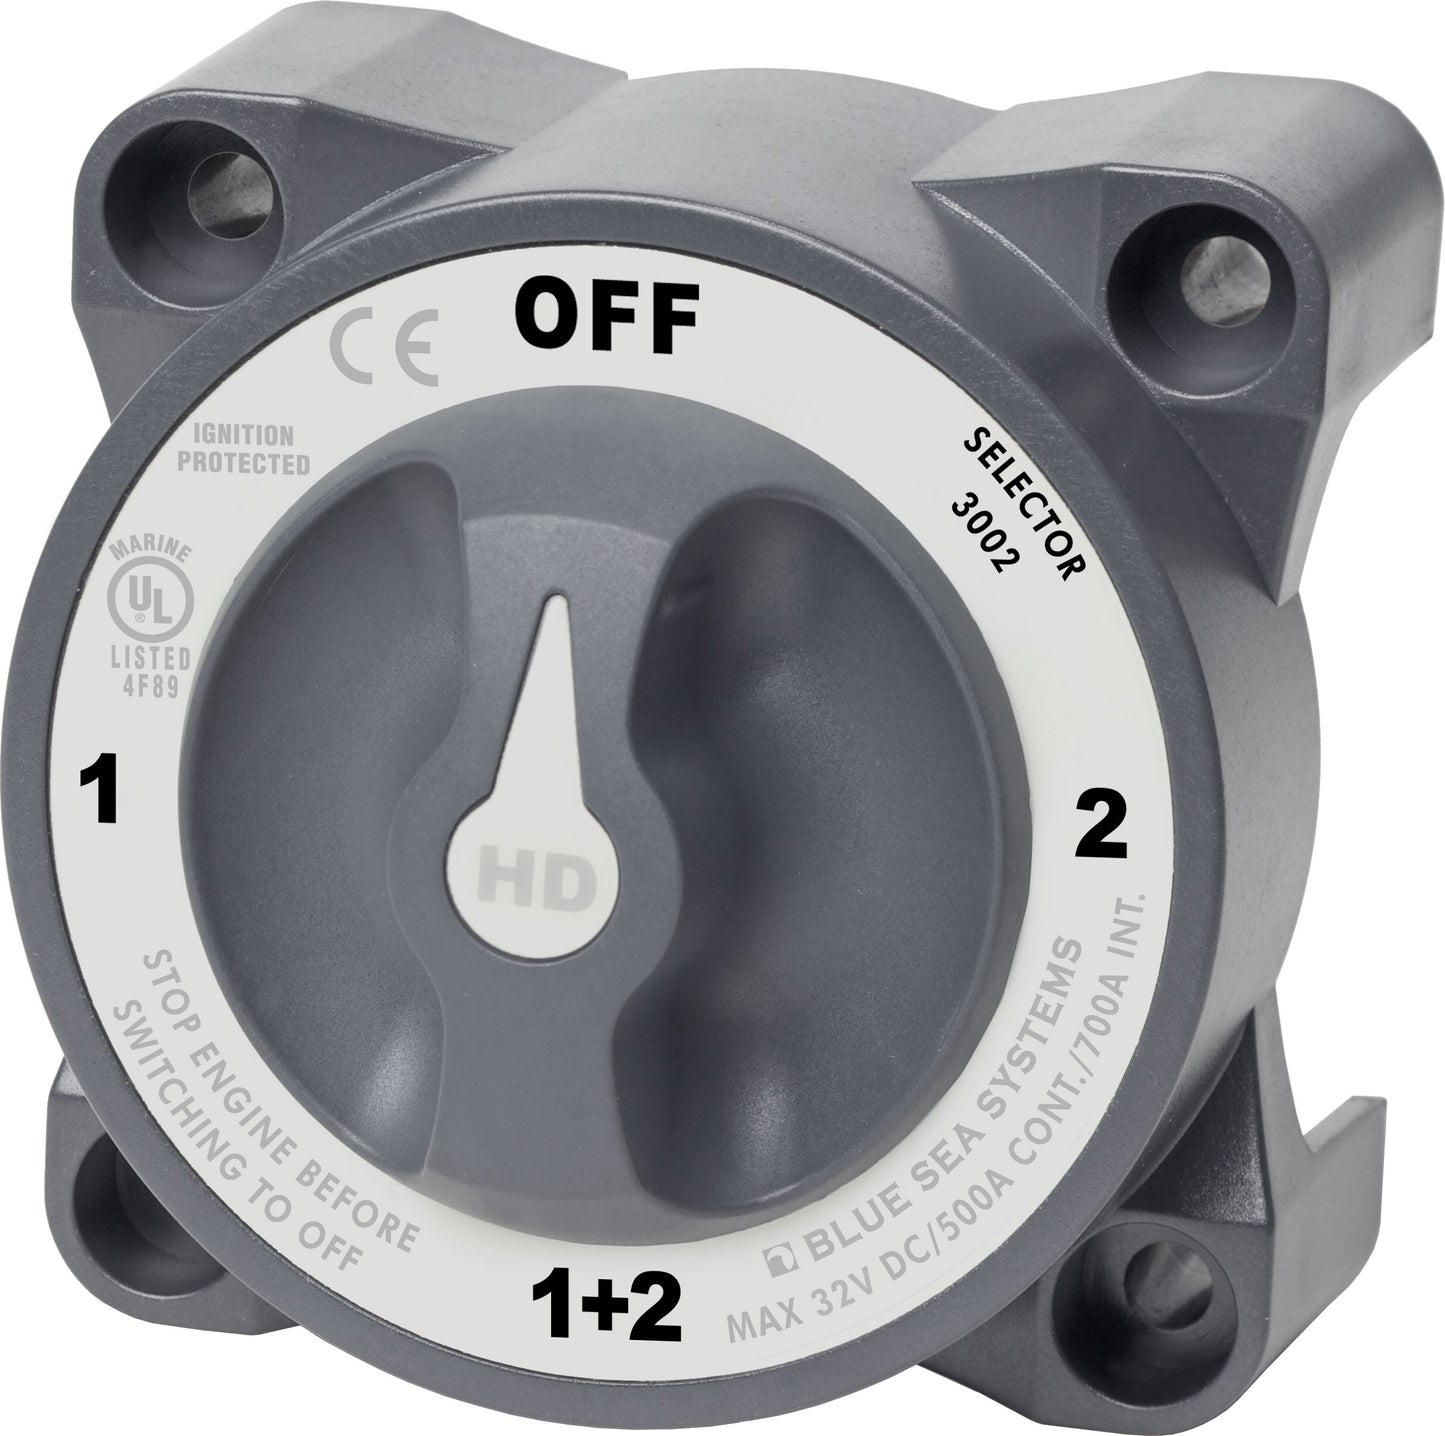 Blue Sea 3002 HD-Series Battery Switch Selector [3002]